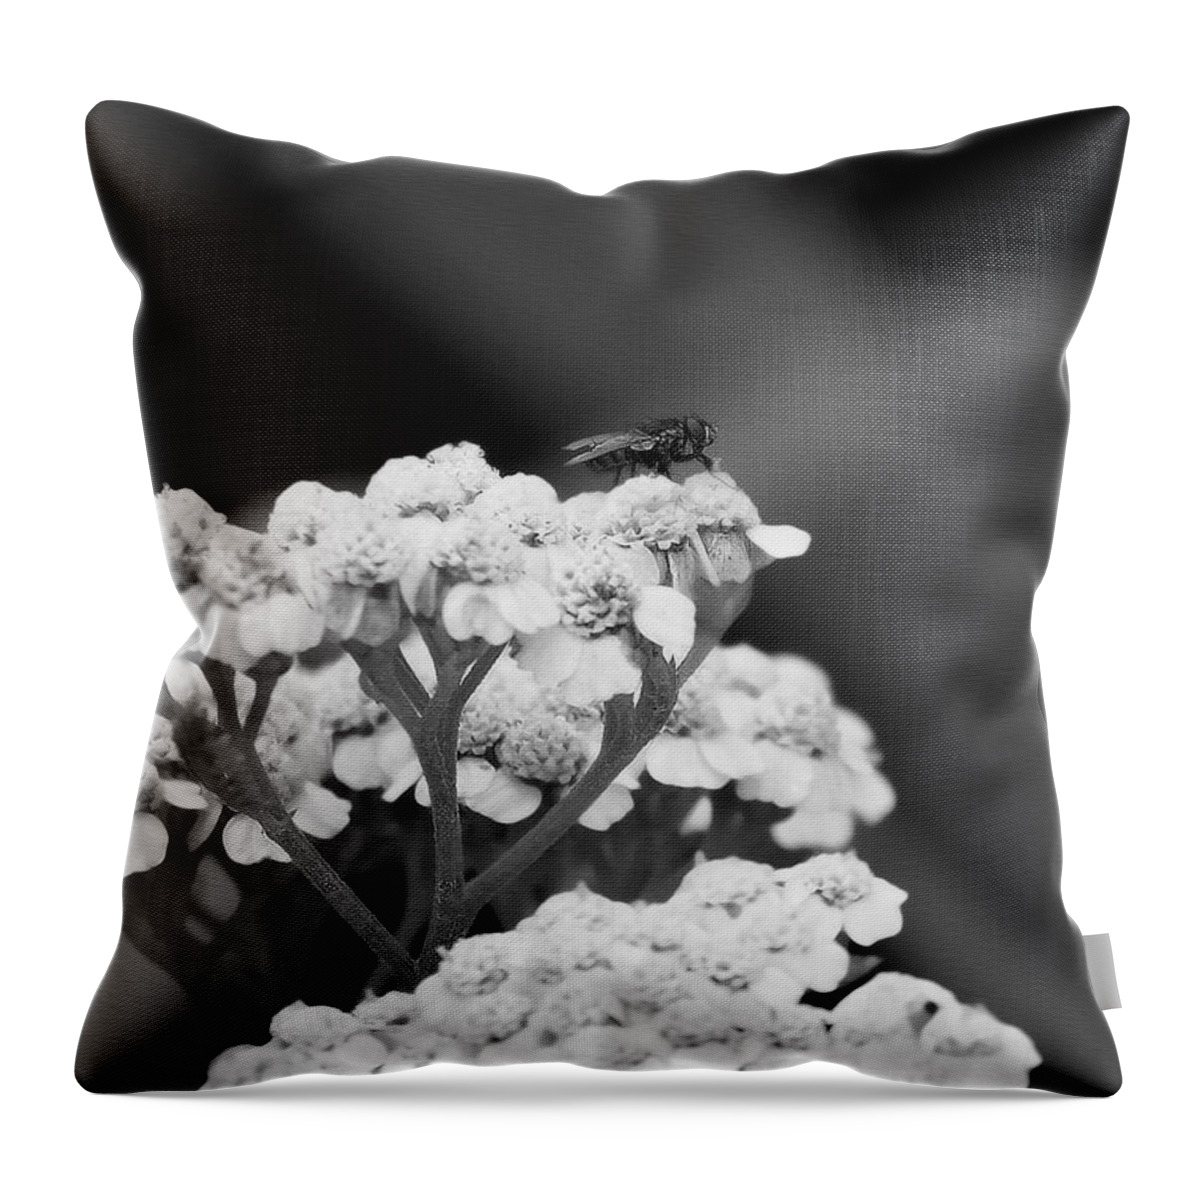 Fly Throw Pillow featuring the photograph Strange Beauty by Marysue Ryan